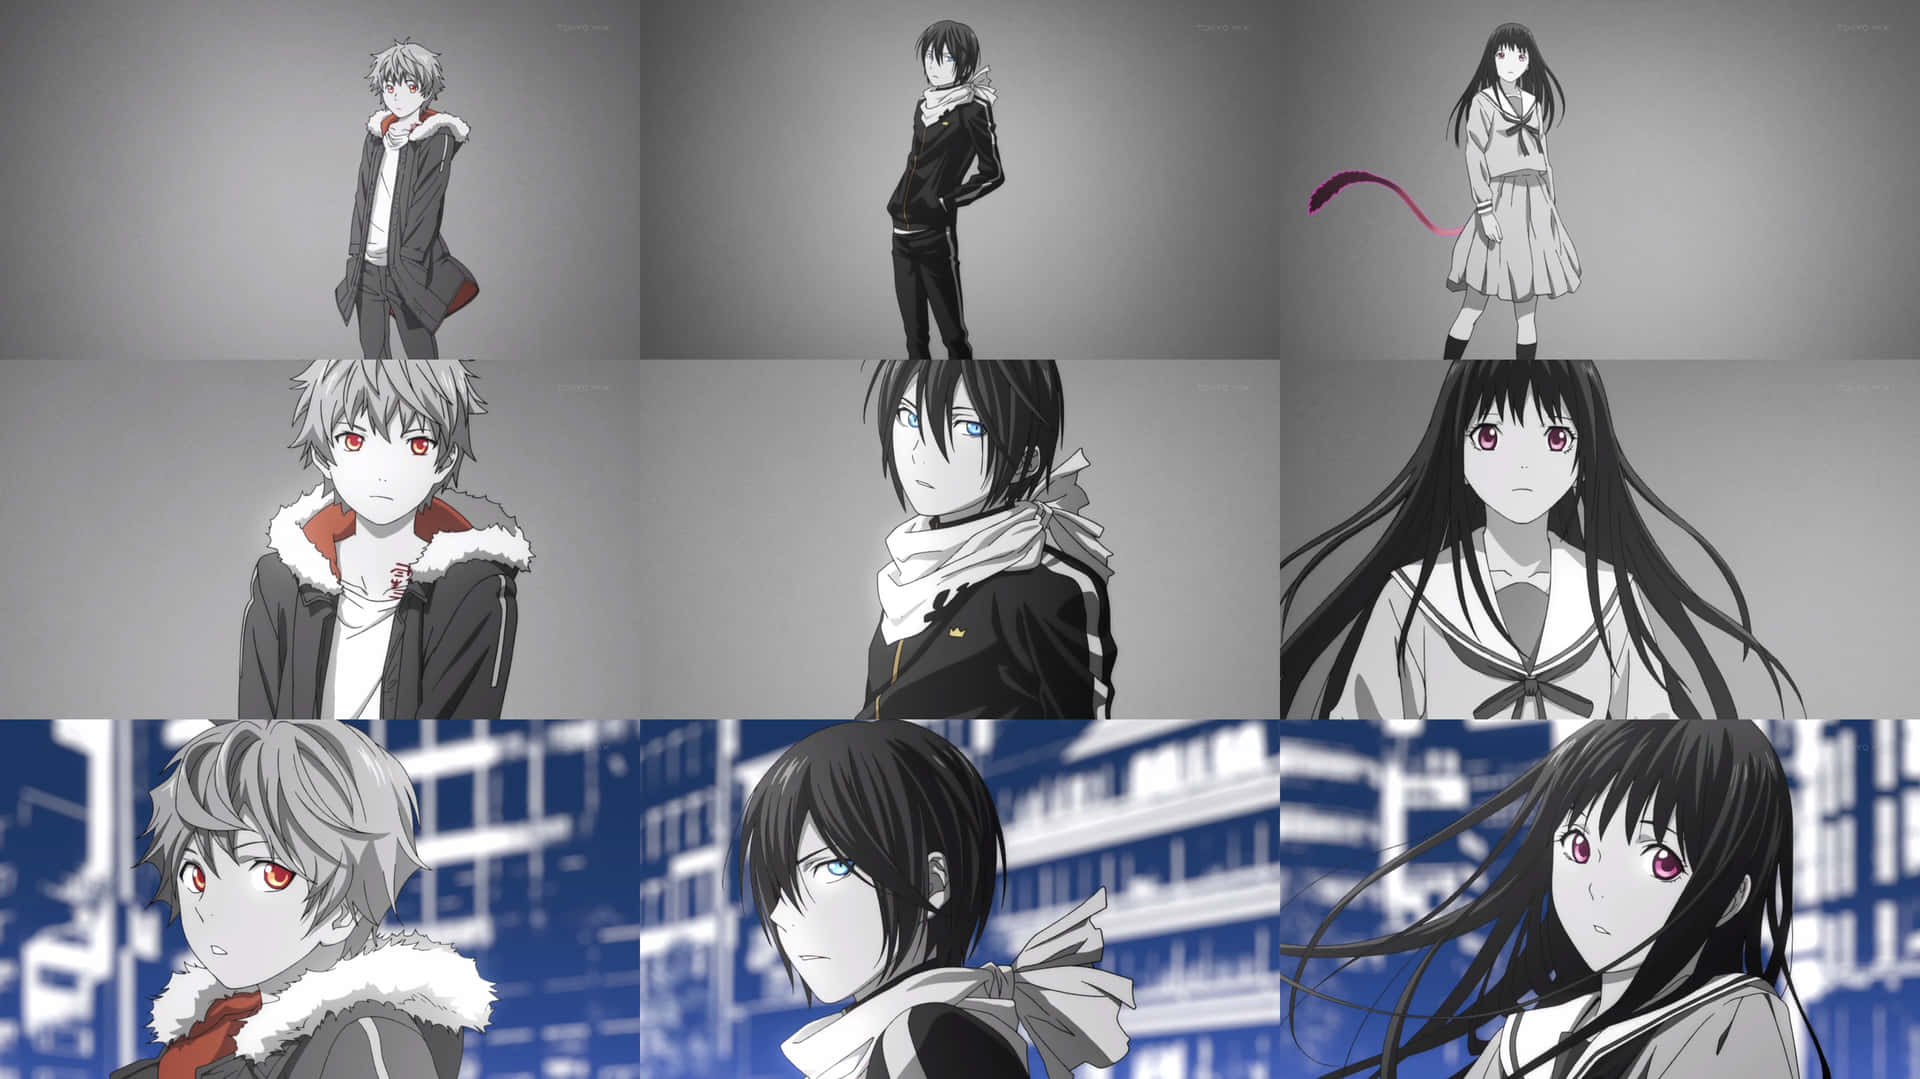 "The Divine Forces of Noragami"